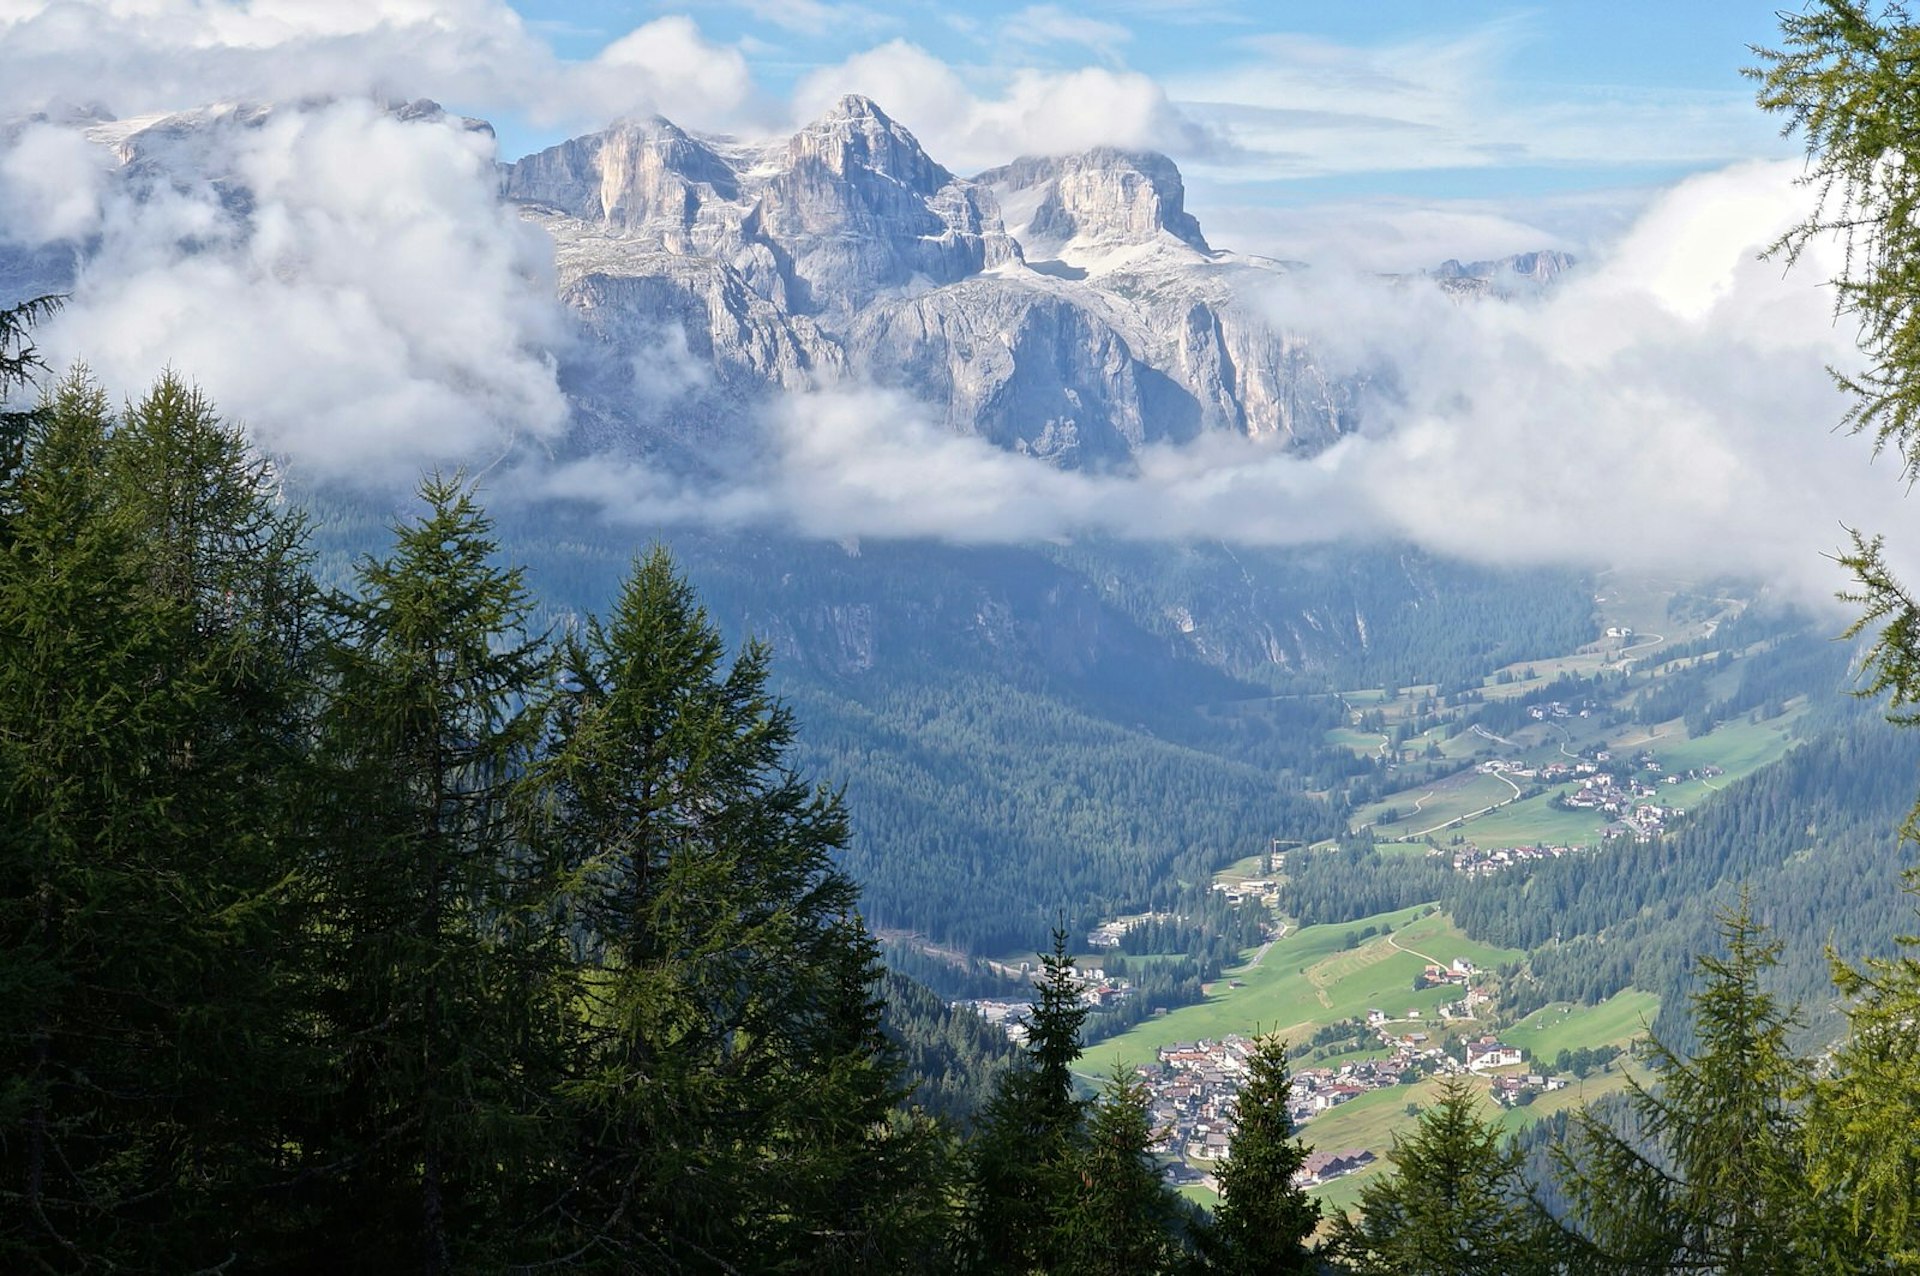 The dramatic Dolomites mountains tower over the Alta Badia valley